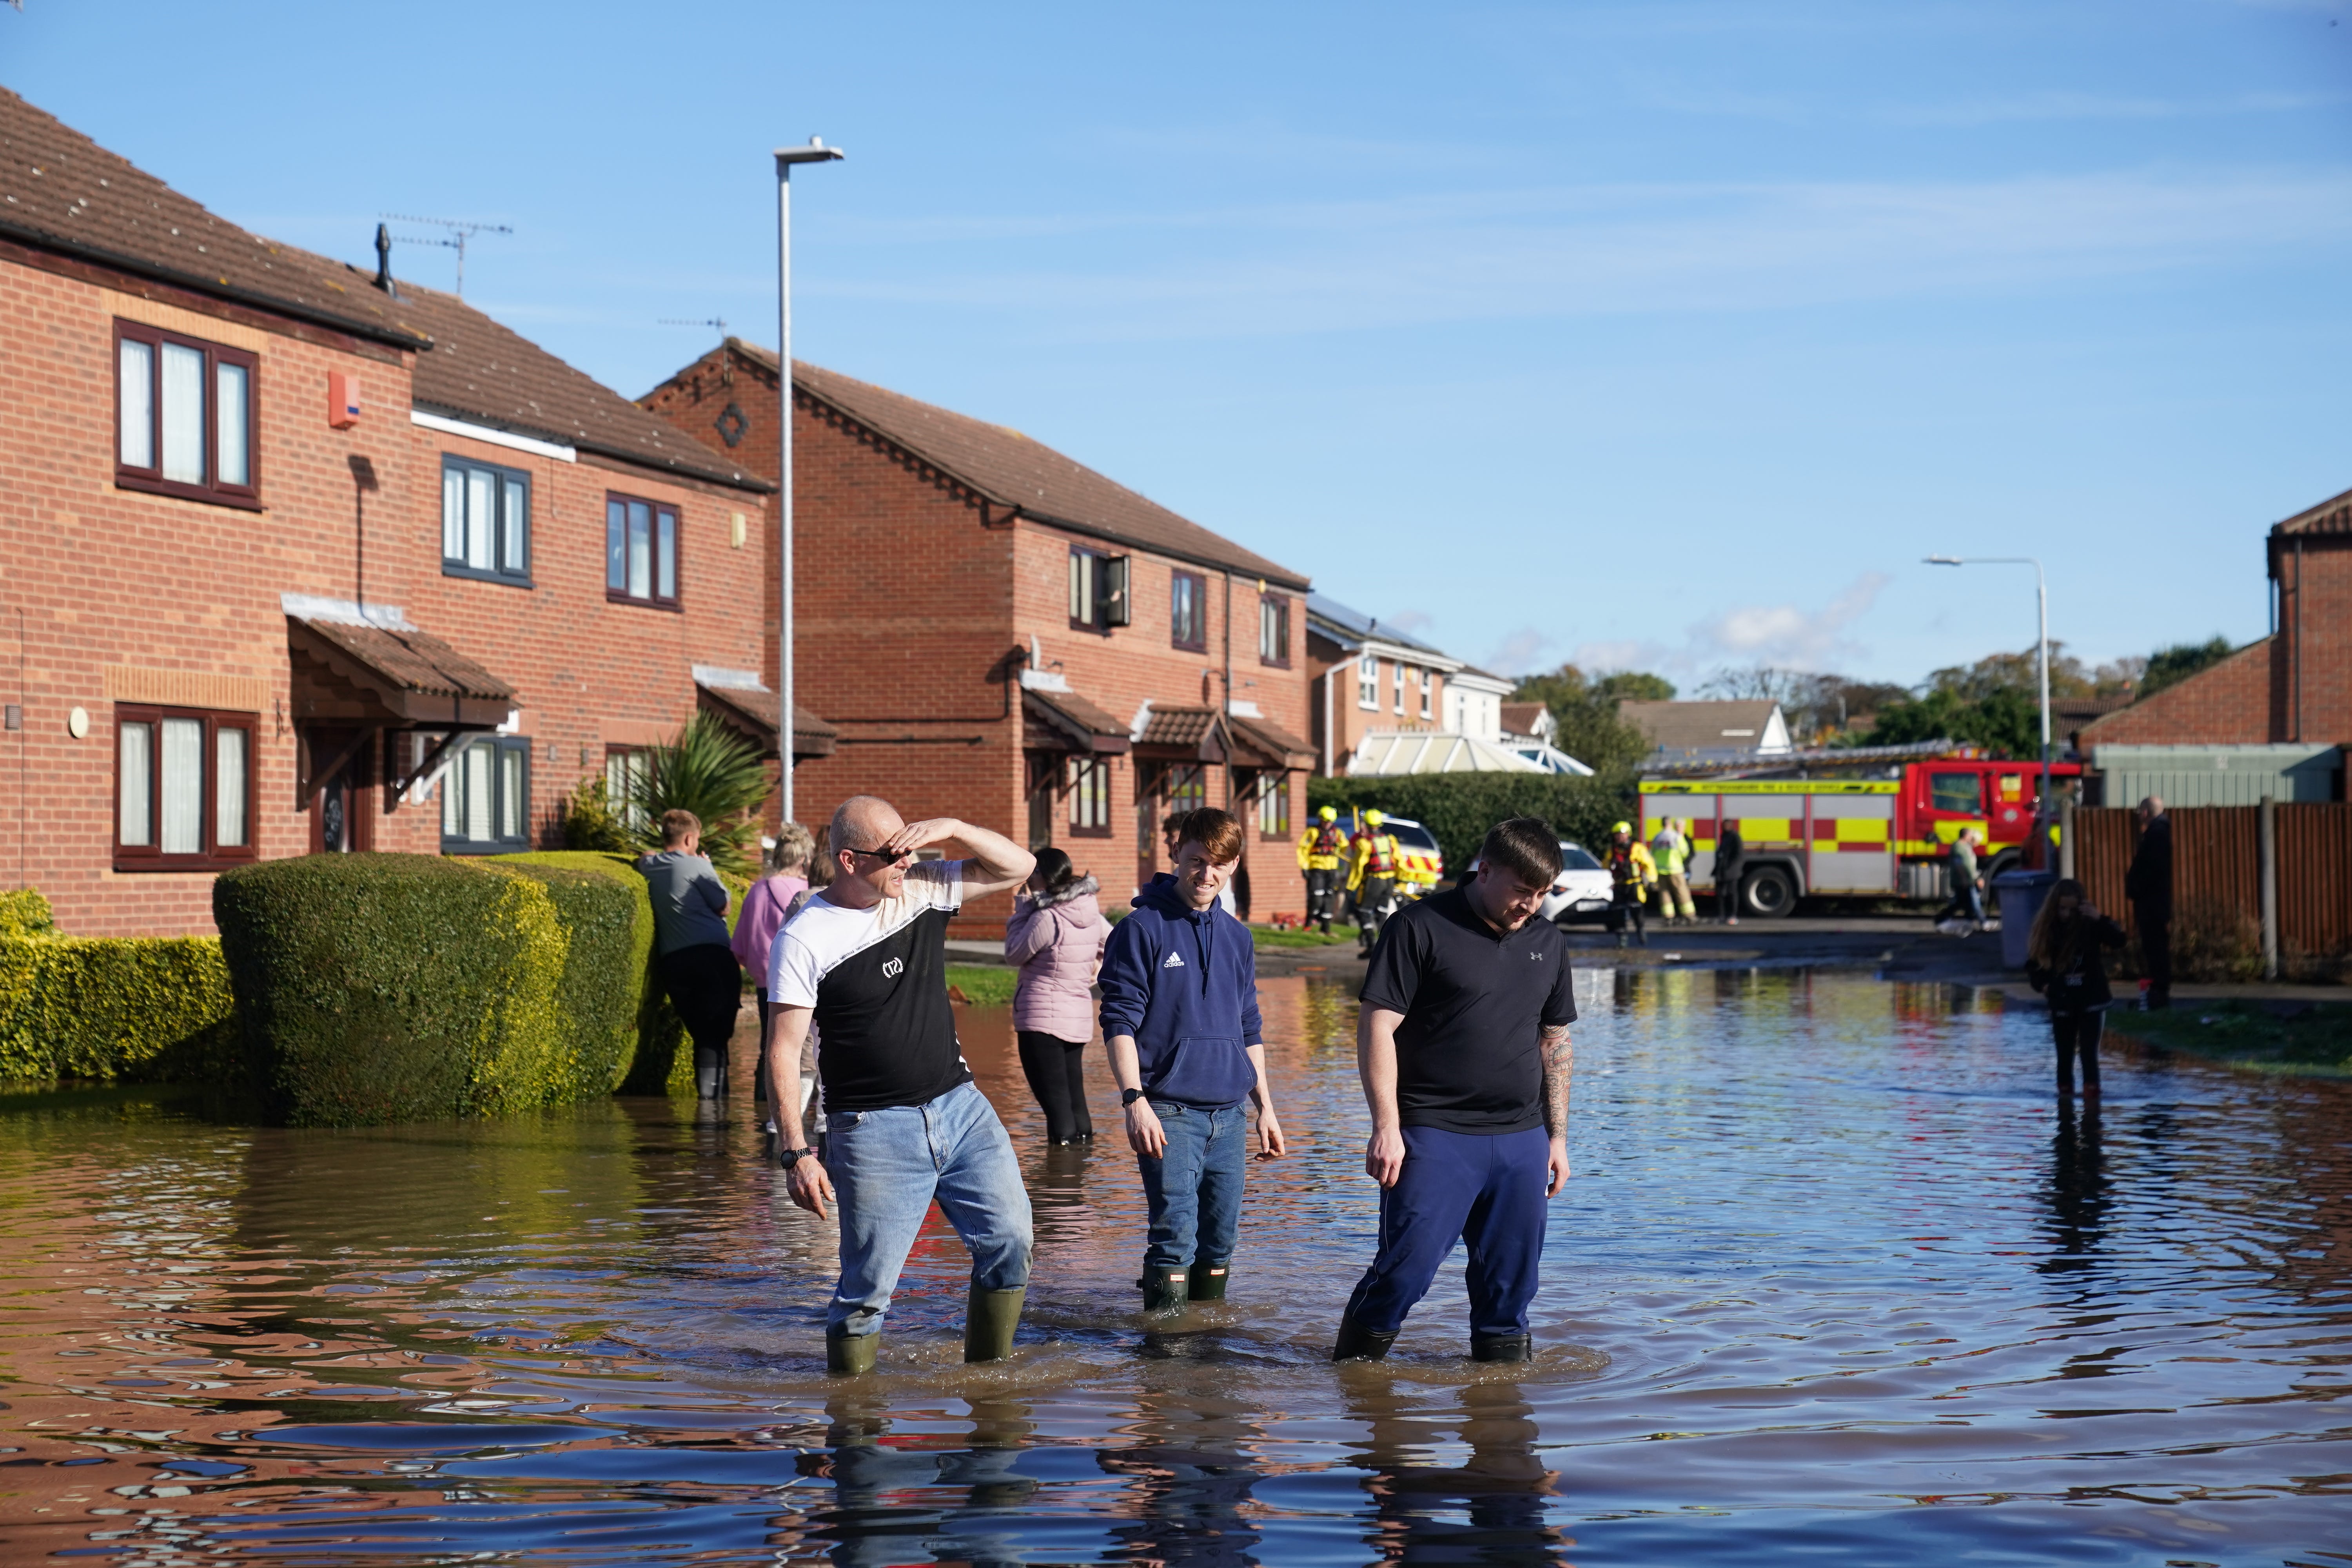 Residents walk through flood water in Retford in Nottinghamshire, after Storm Babet battered the UK